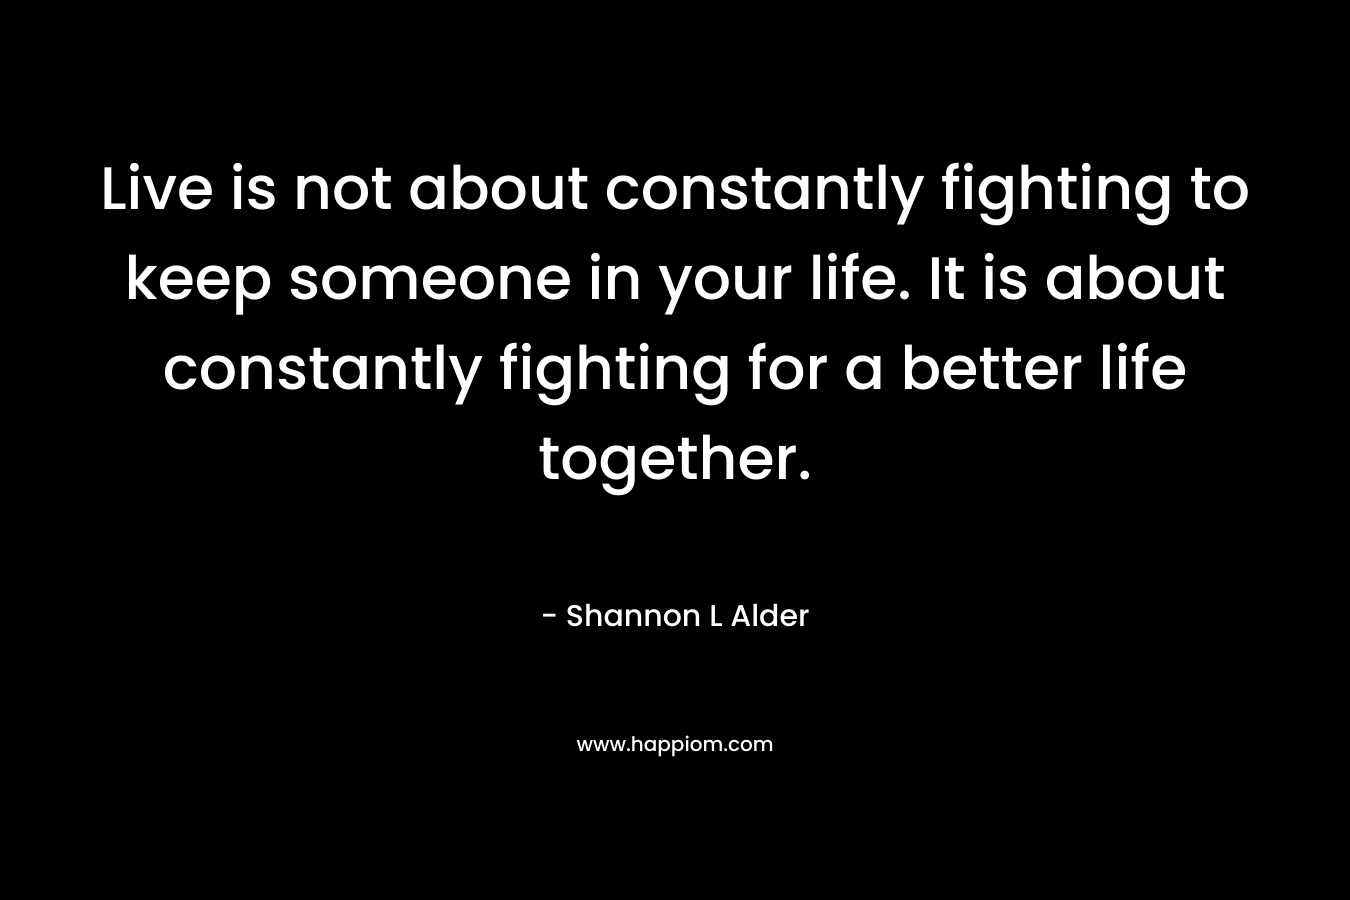 Live is not about constantly fighting to keep someone in your life. It is about constantly fighting for a better life together.